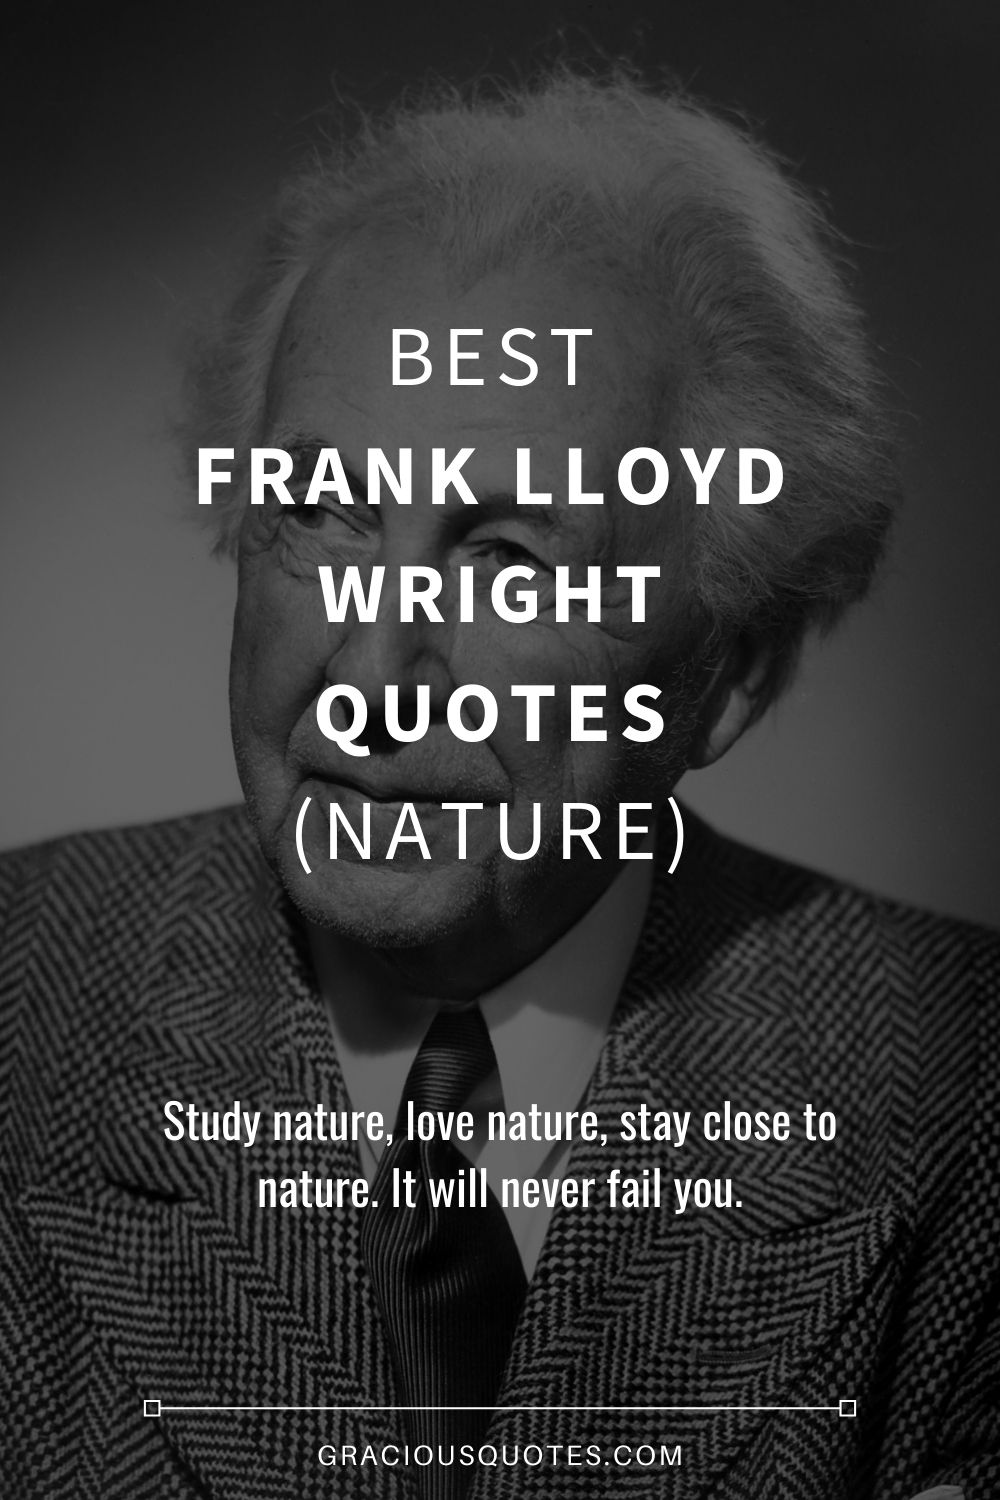 Best Frank Lloyd Wright Quotes (NATURE) - Gracious Quotes